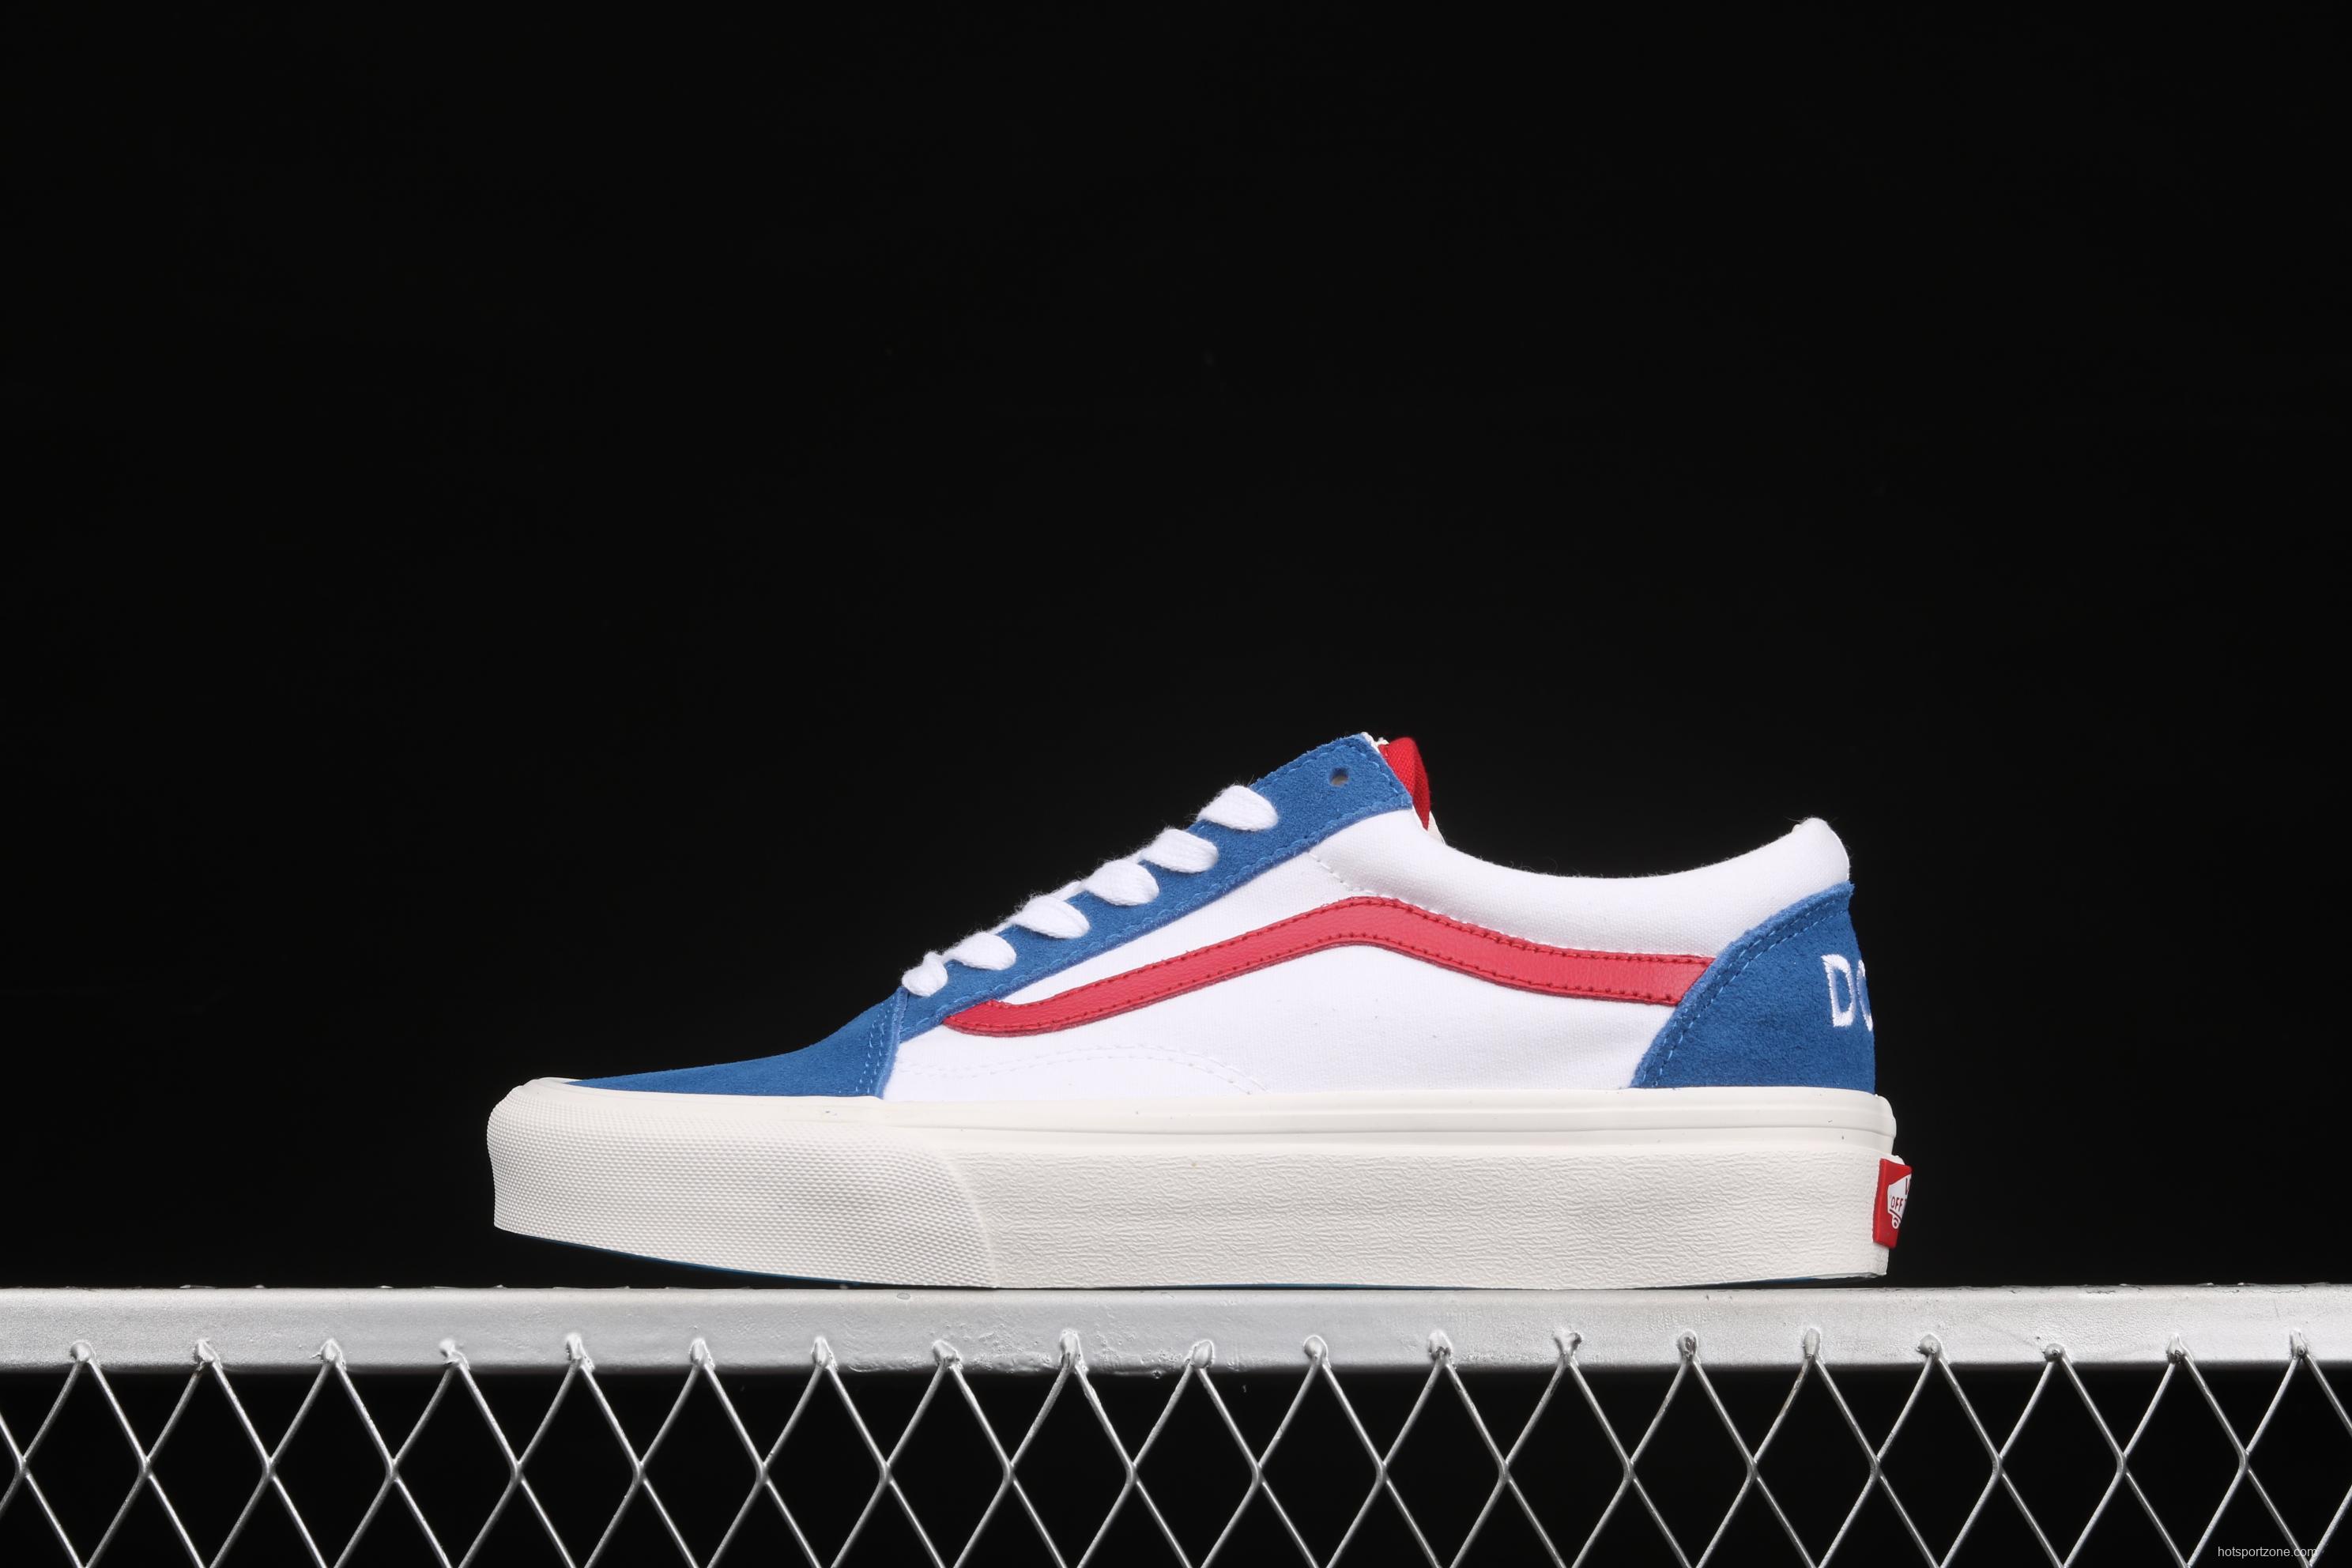 Doraemon x Vans jointly ordered DIY limited edition low upper shoes VN0A45KDVUP